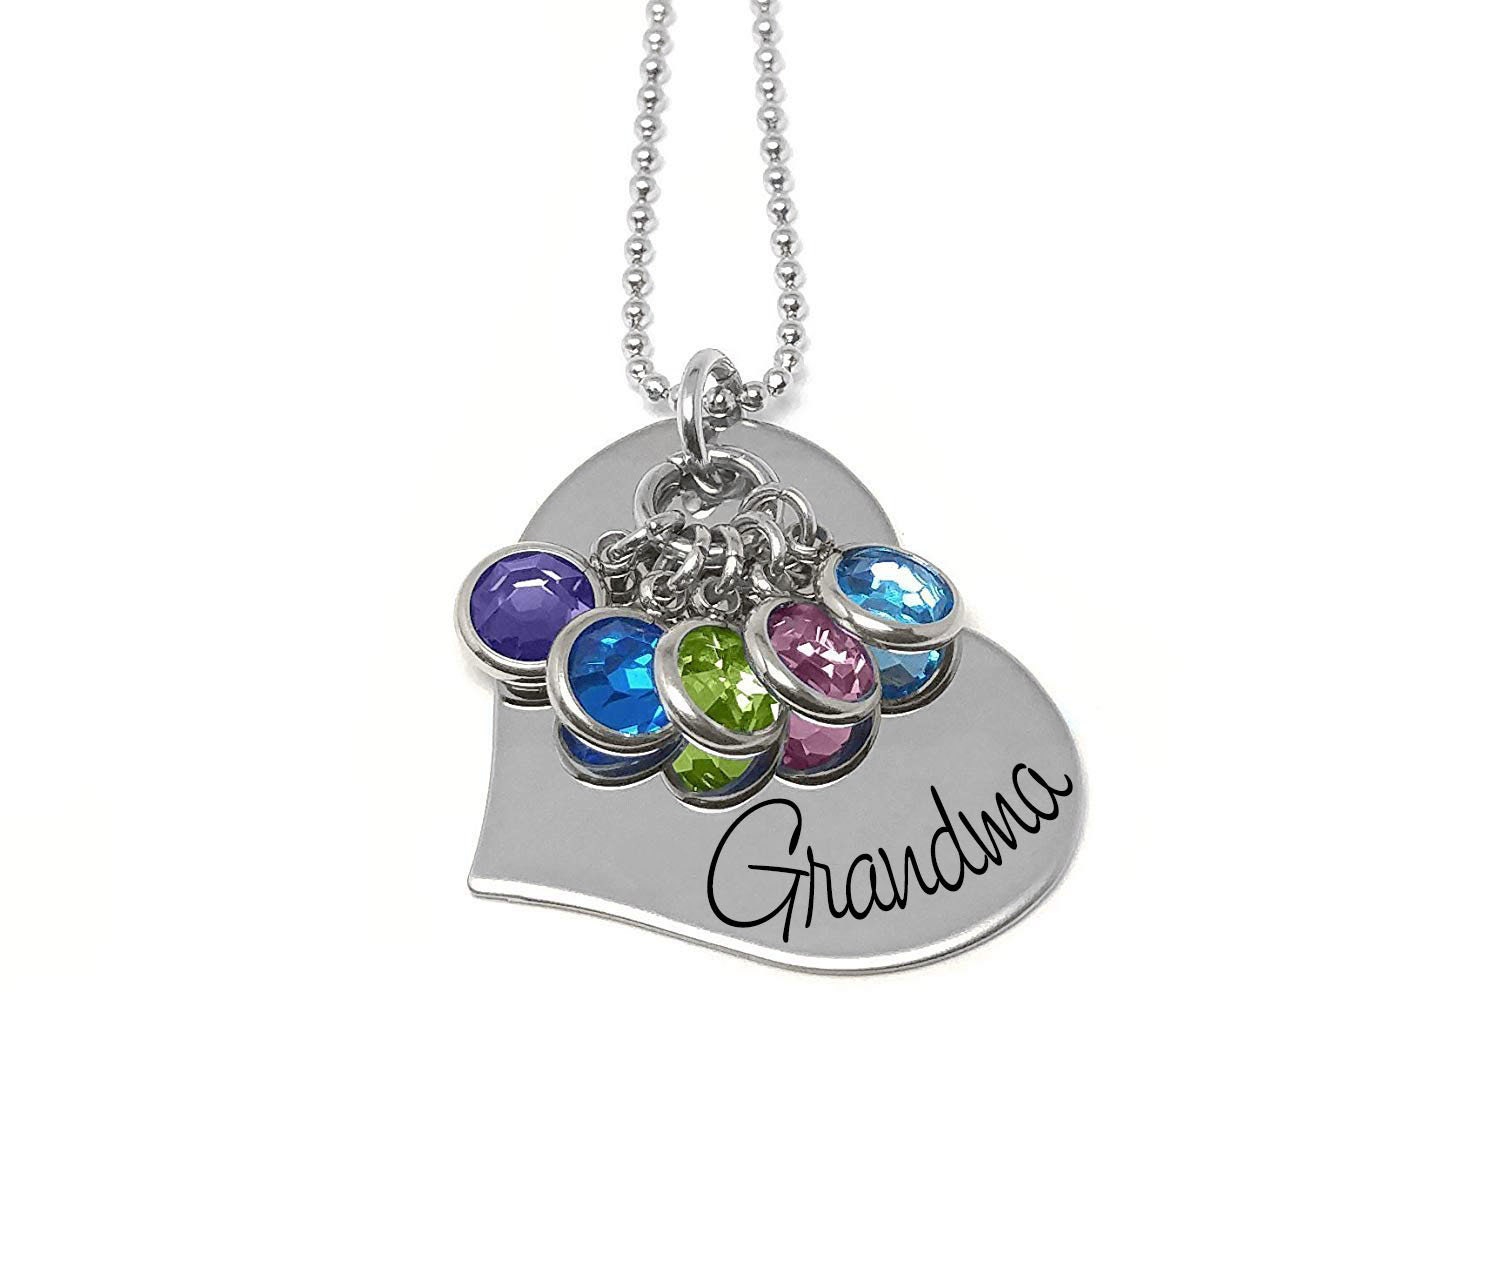 Personalized Necklace- Grandma Necklace- Mother's Day Gift ...